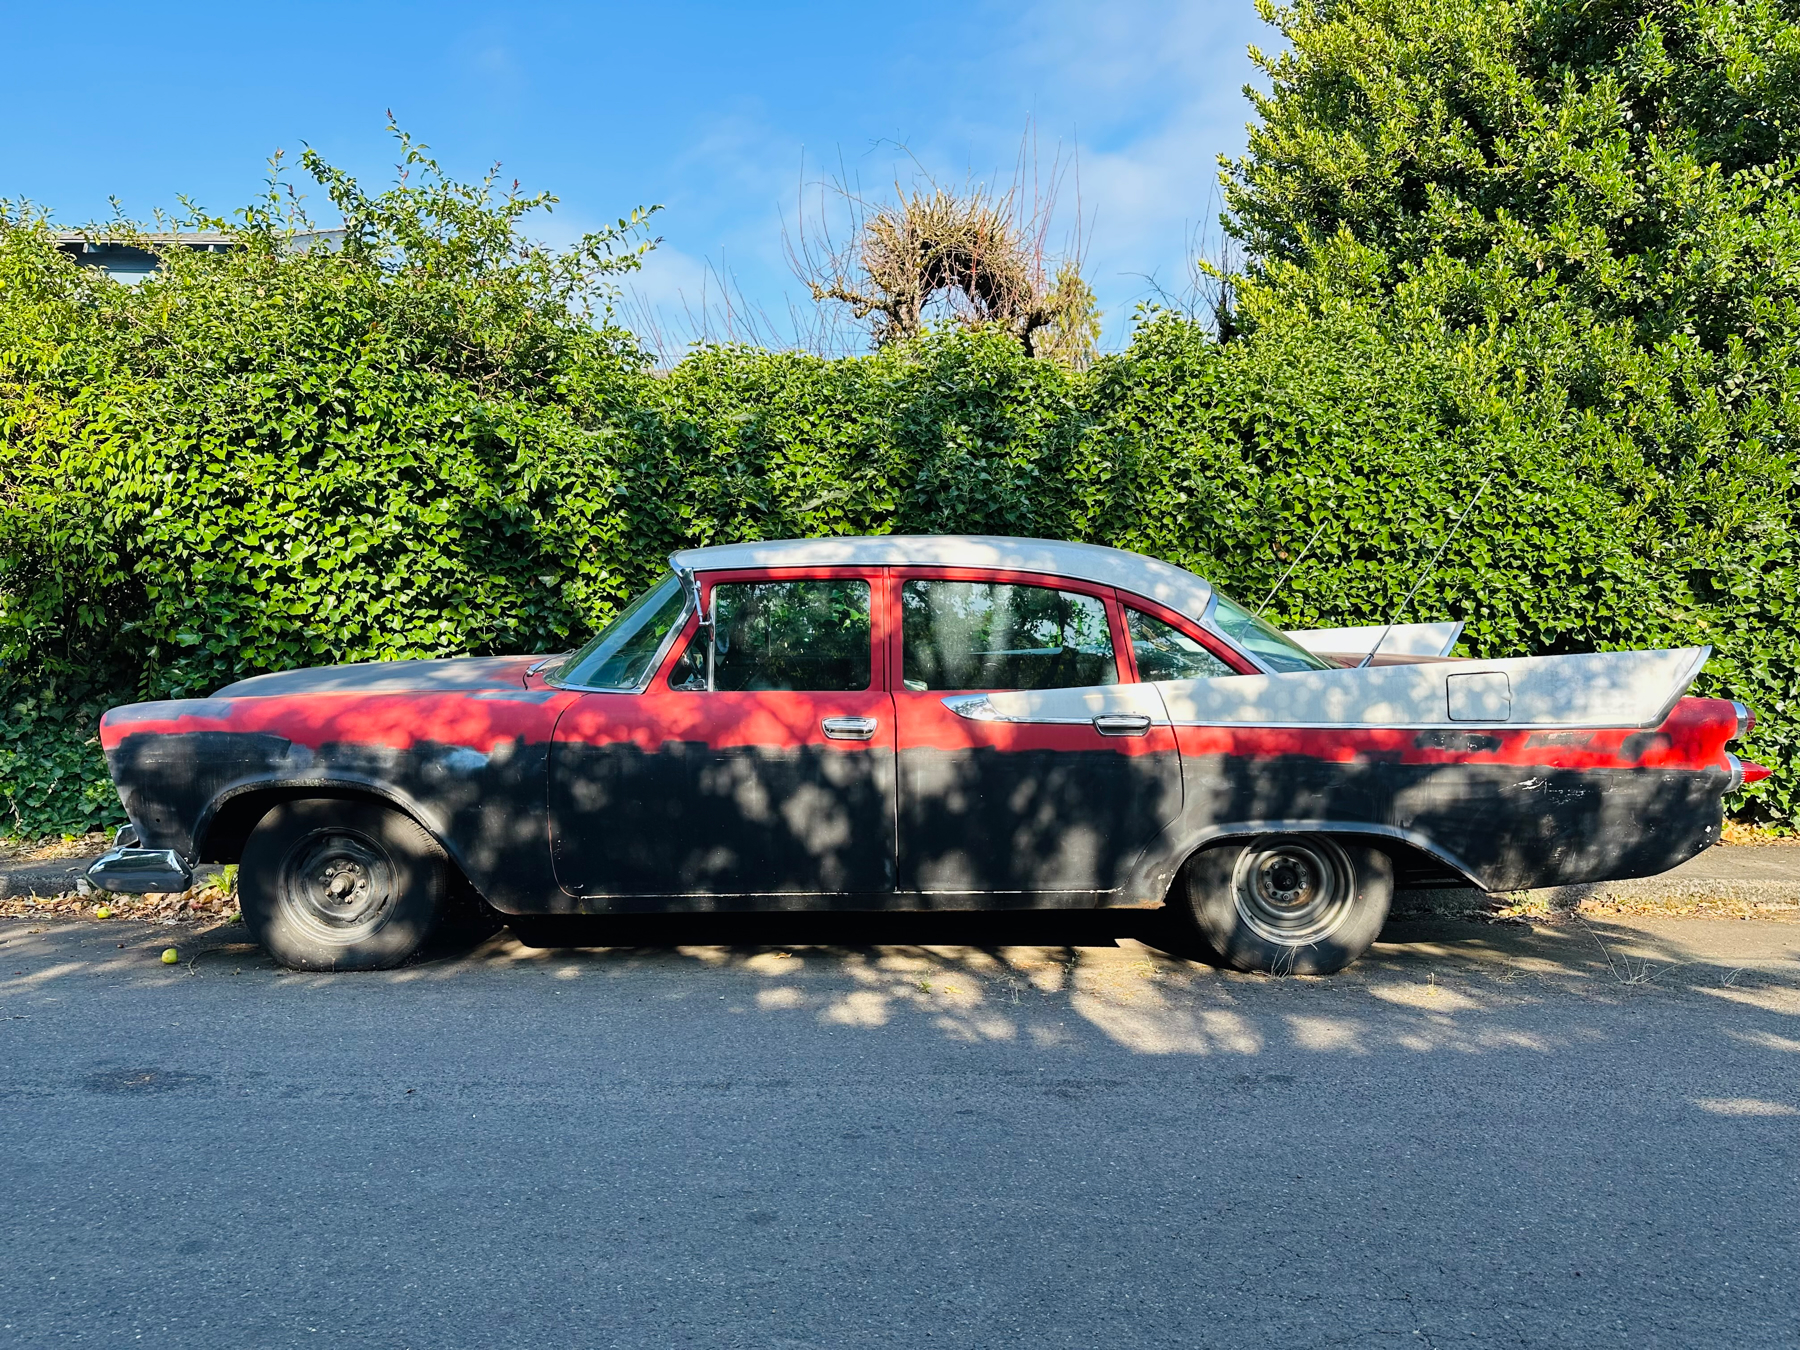 Side view of a vintage car in red white and black parked on the other side of the street. There’s a tall green hedge behind, blue sky above, and road in the foreground. The car has the speckled shadow of a tree on it.